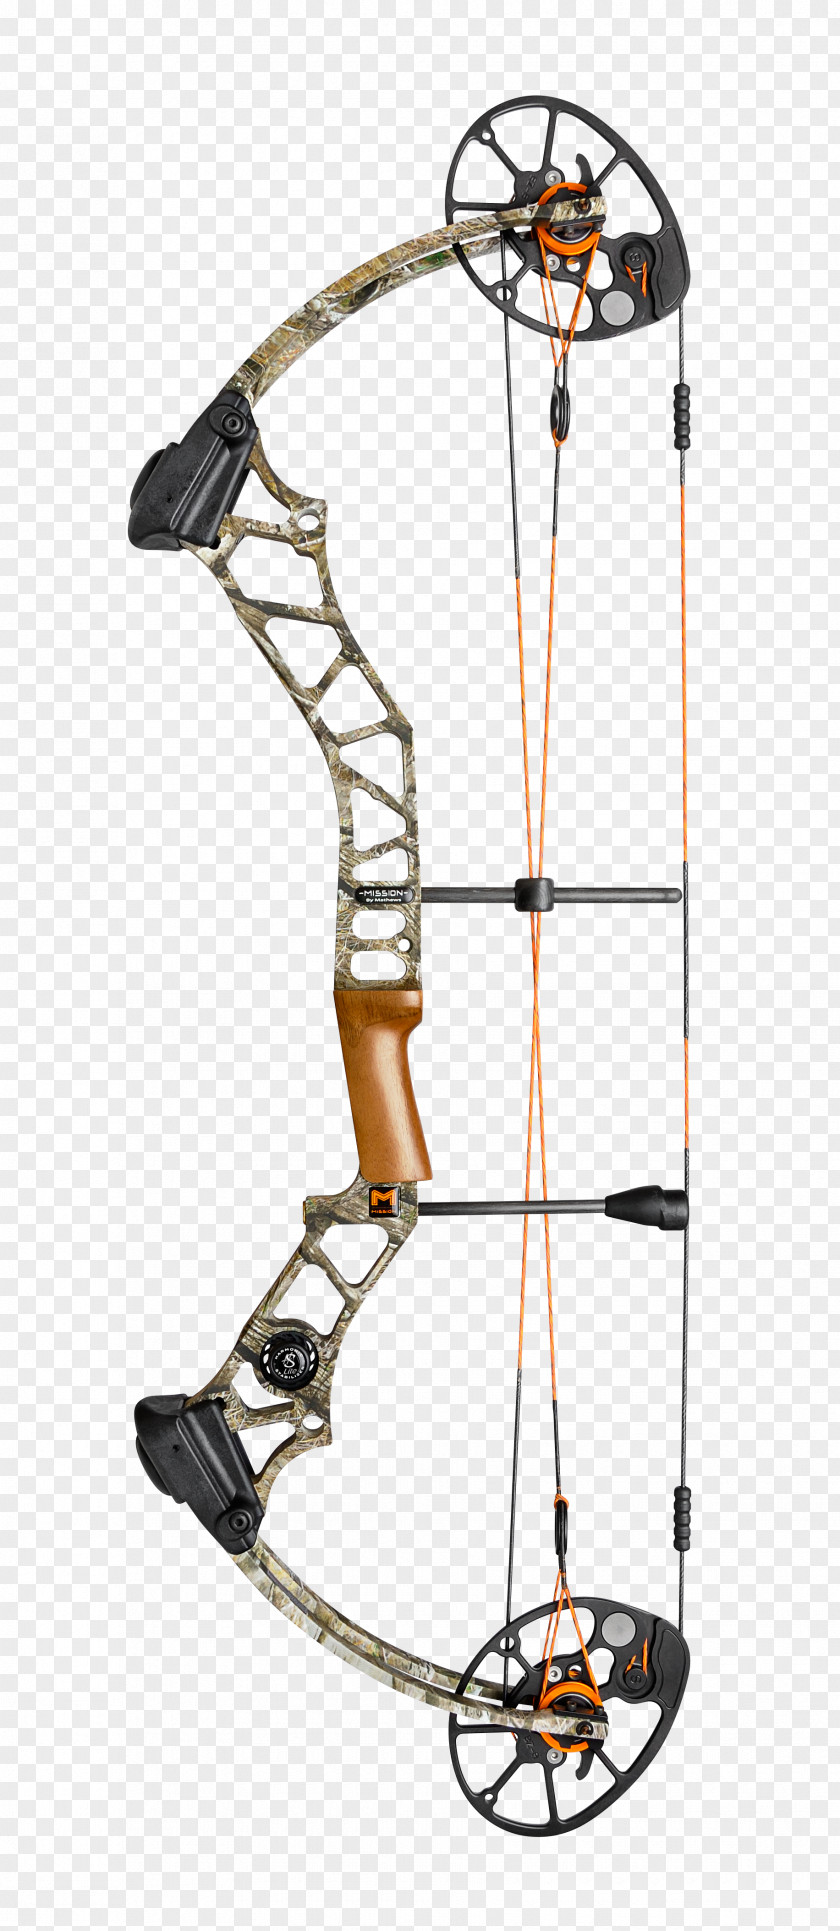 Blaze Bow And Arrow Hunting Compound Bows Ballistics Crossbow PNG